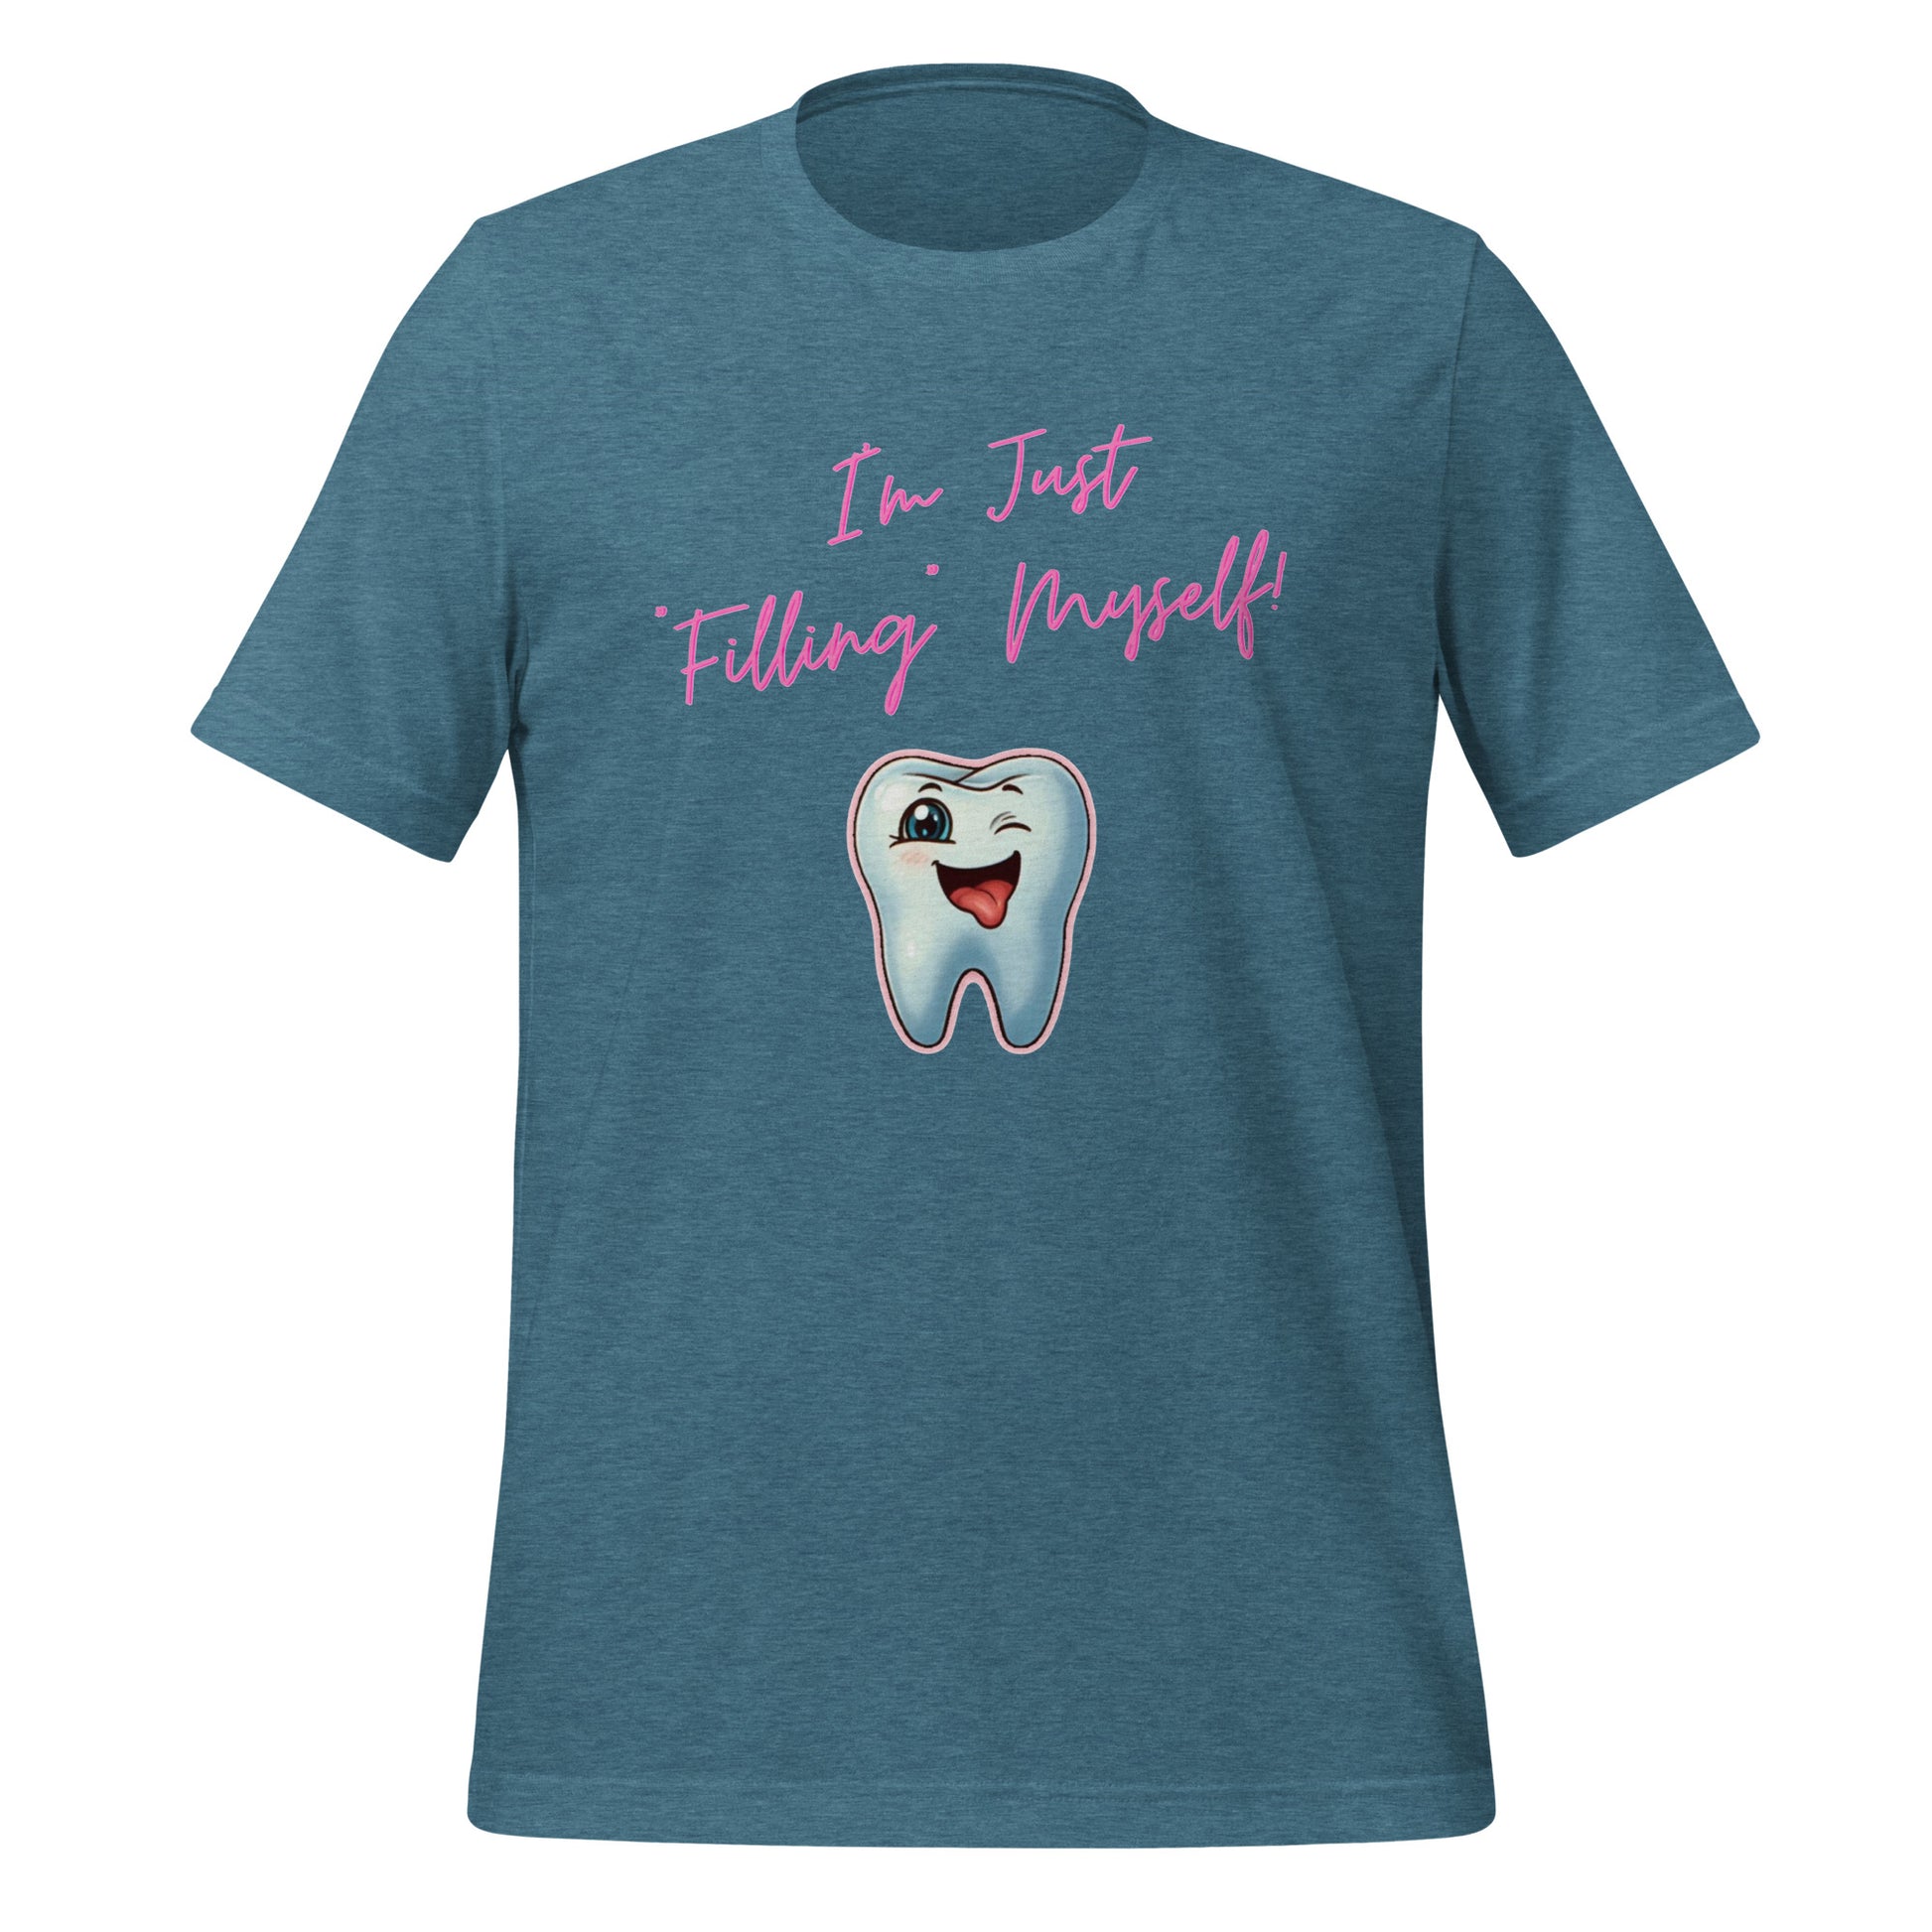 Flirtatious winking cartoon tooth character with the phrase "I'm just filling myself!" Ideal for a funny dental t-shirt or a cute dental assistant shirt. Heather deep teal color. 